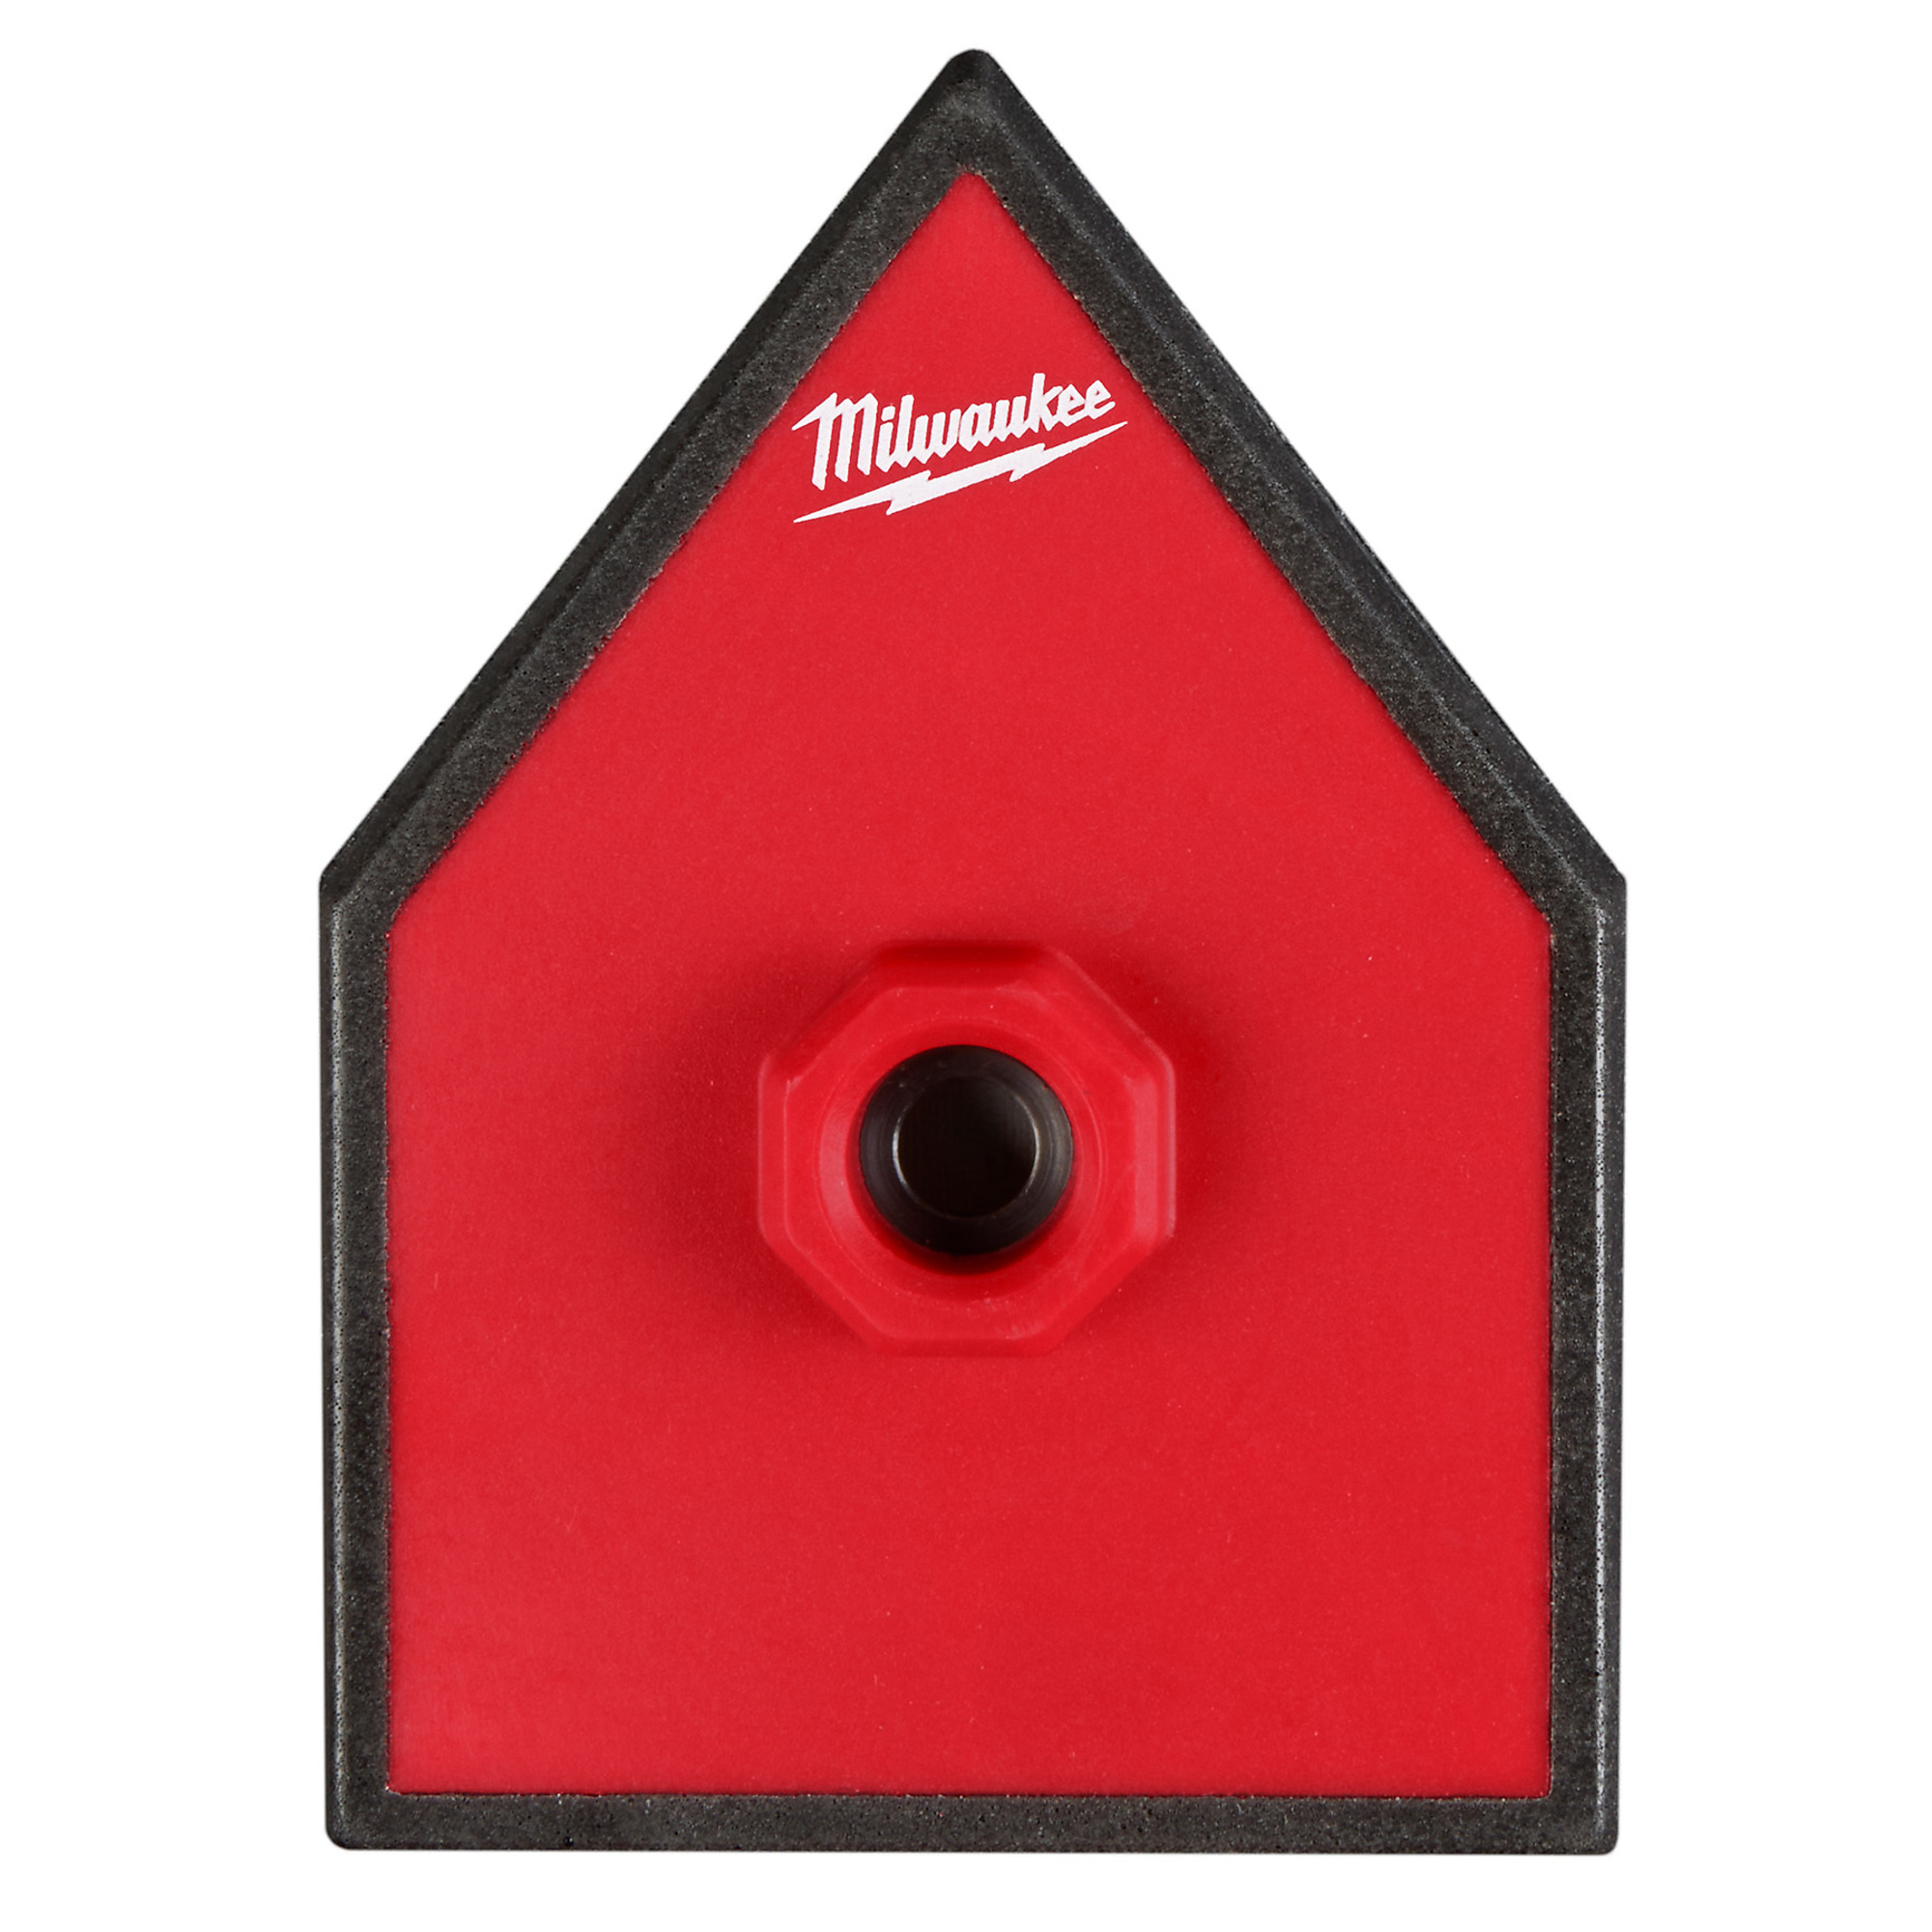 Milwaukee, M12 ORBITAL DETAIL SANDER PAD, Pieces (qty.) 1, Length 0.04 in, Model 49-36-2531